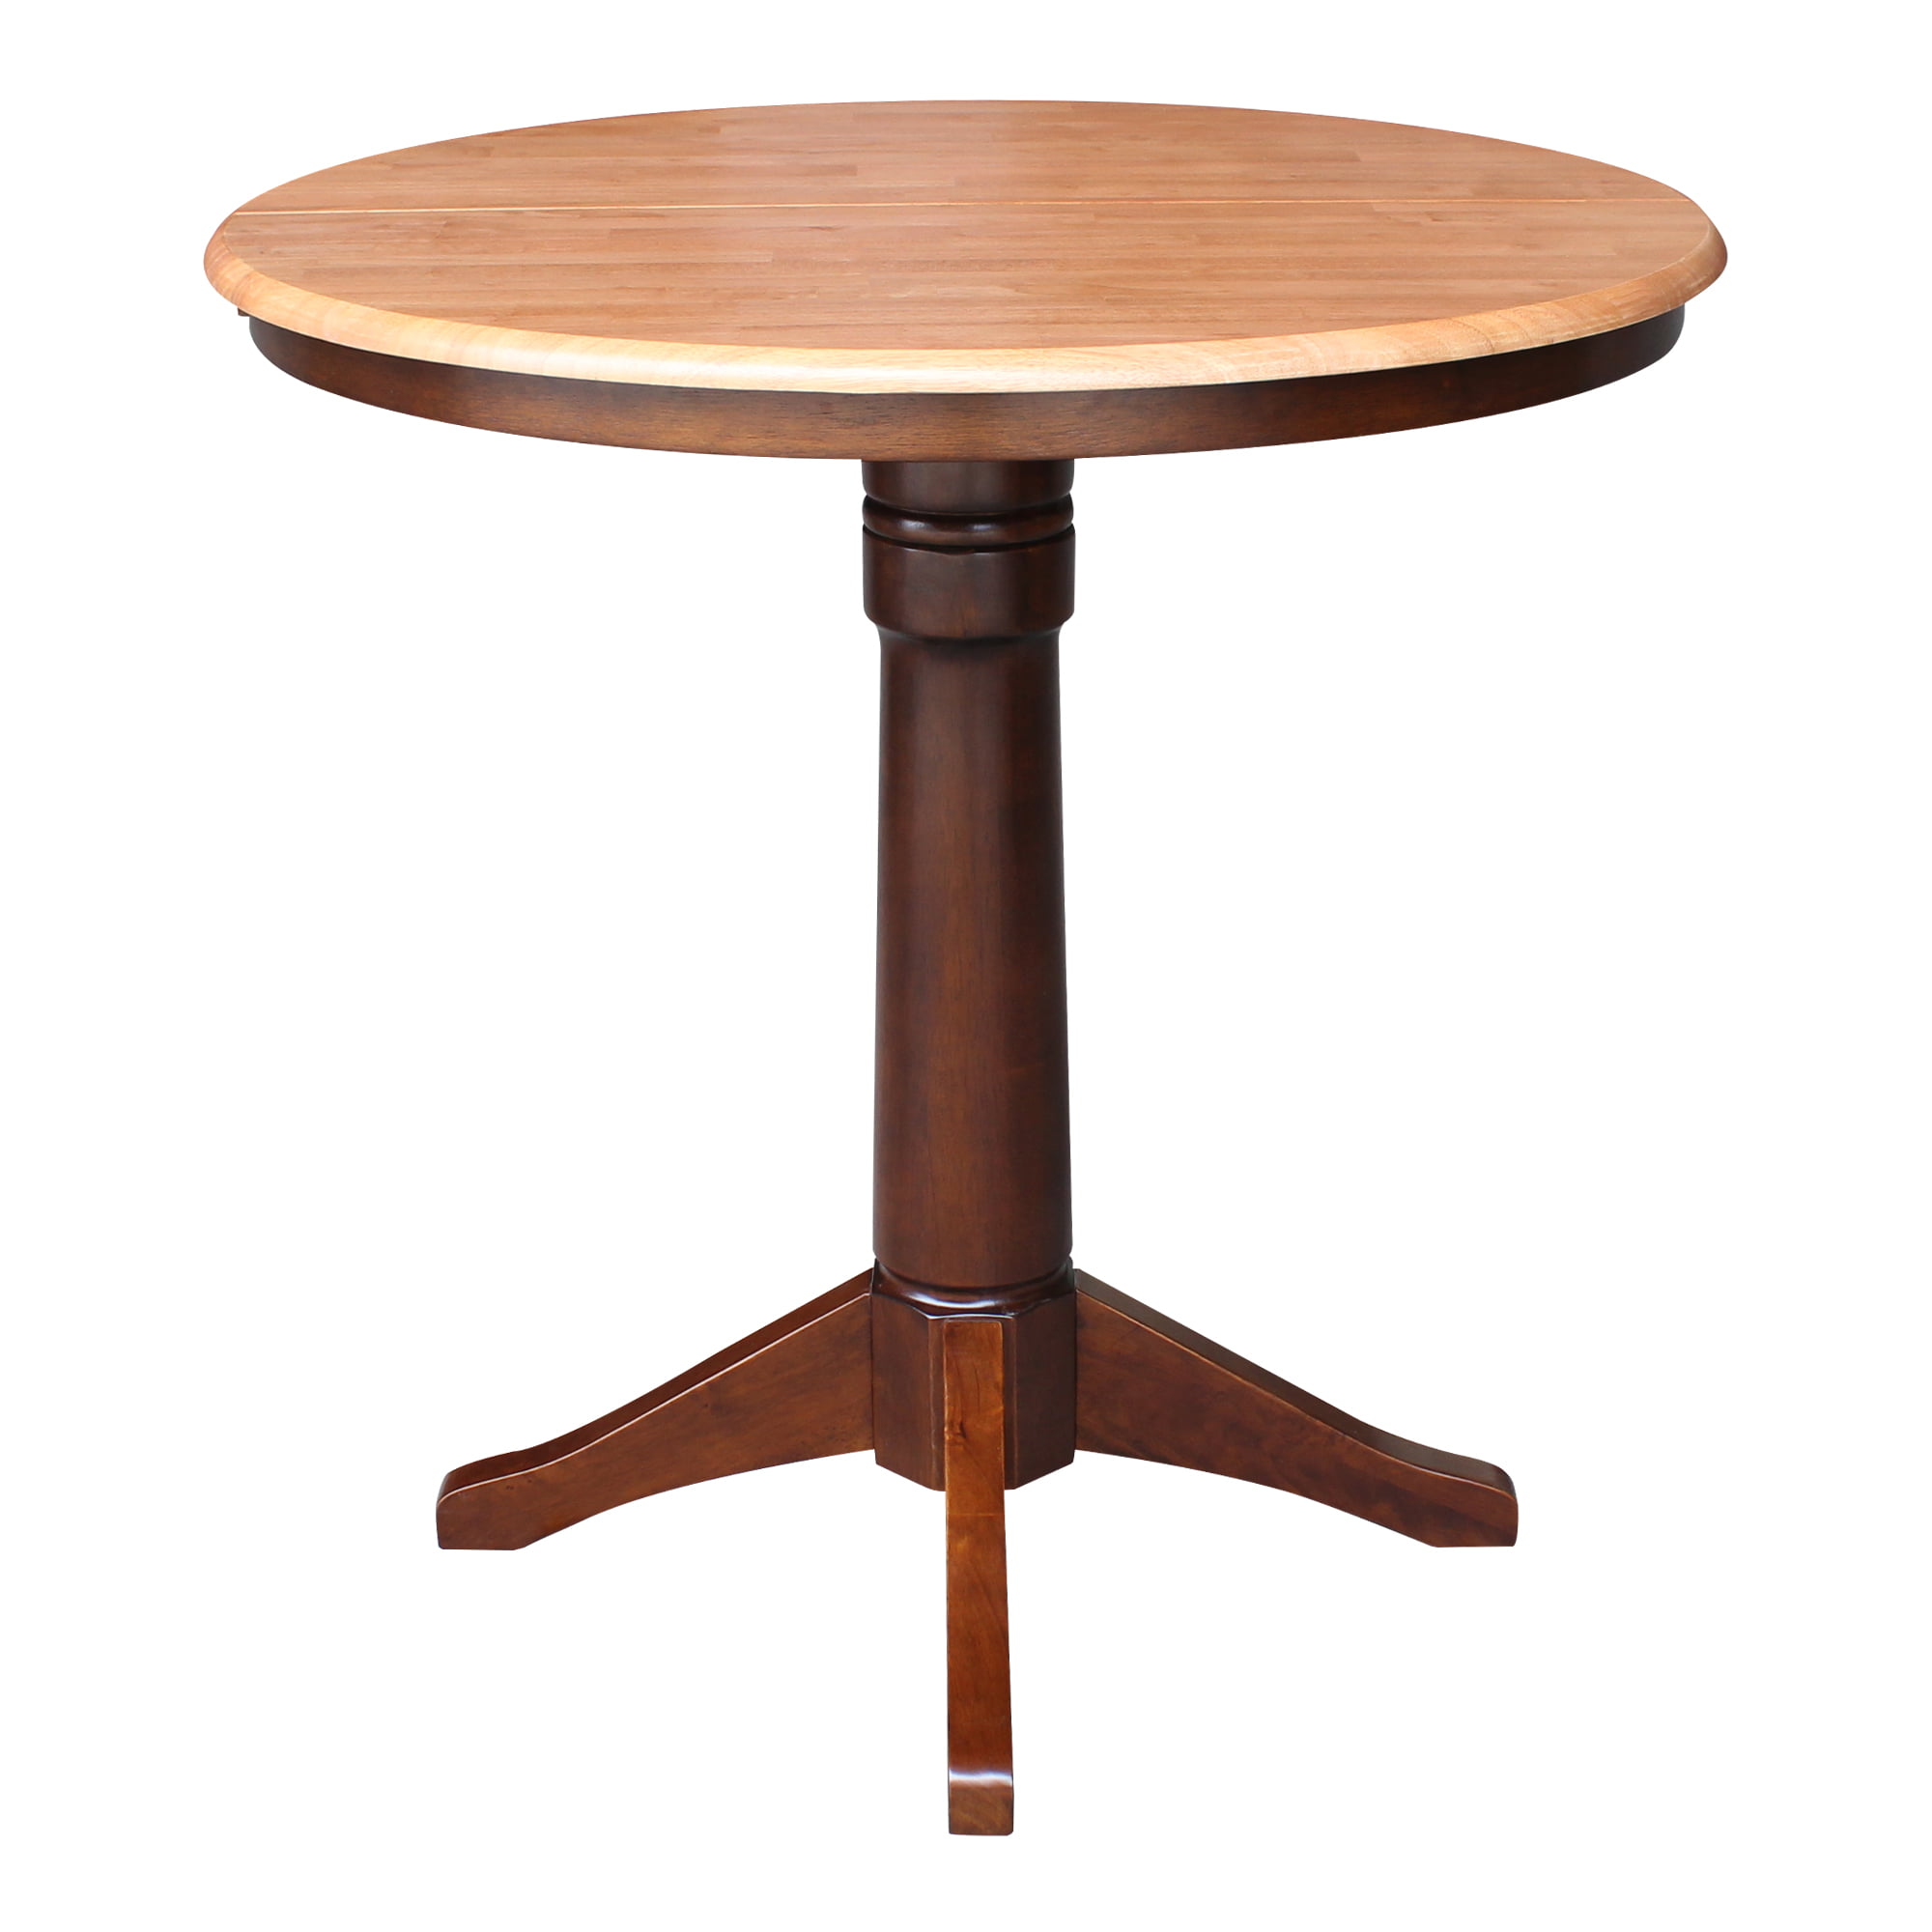 Espresso International Concepts Bar Height 36-Inch Round Extension Table with 12-Inch Leaf